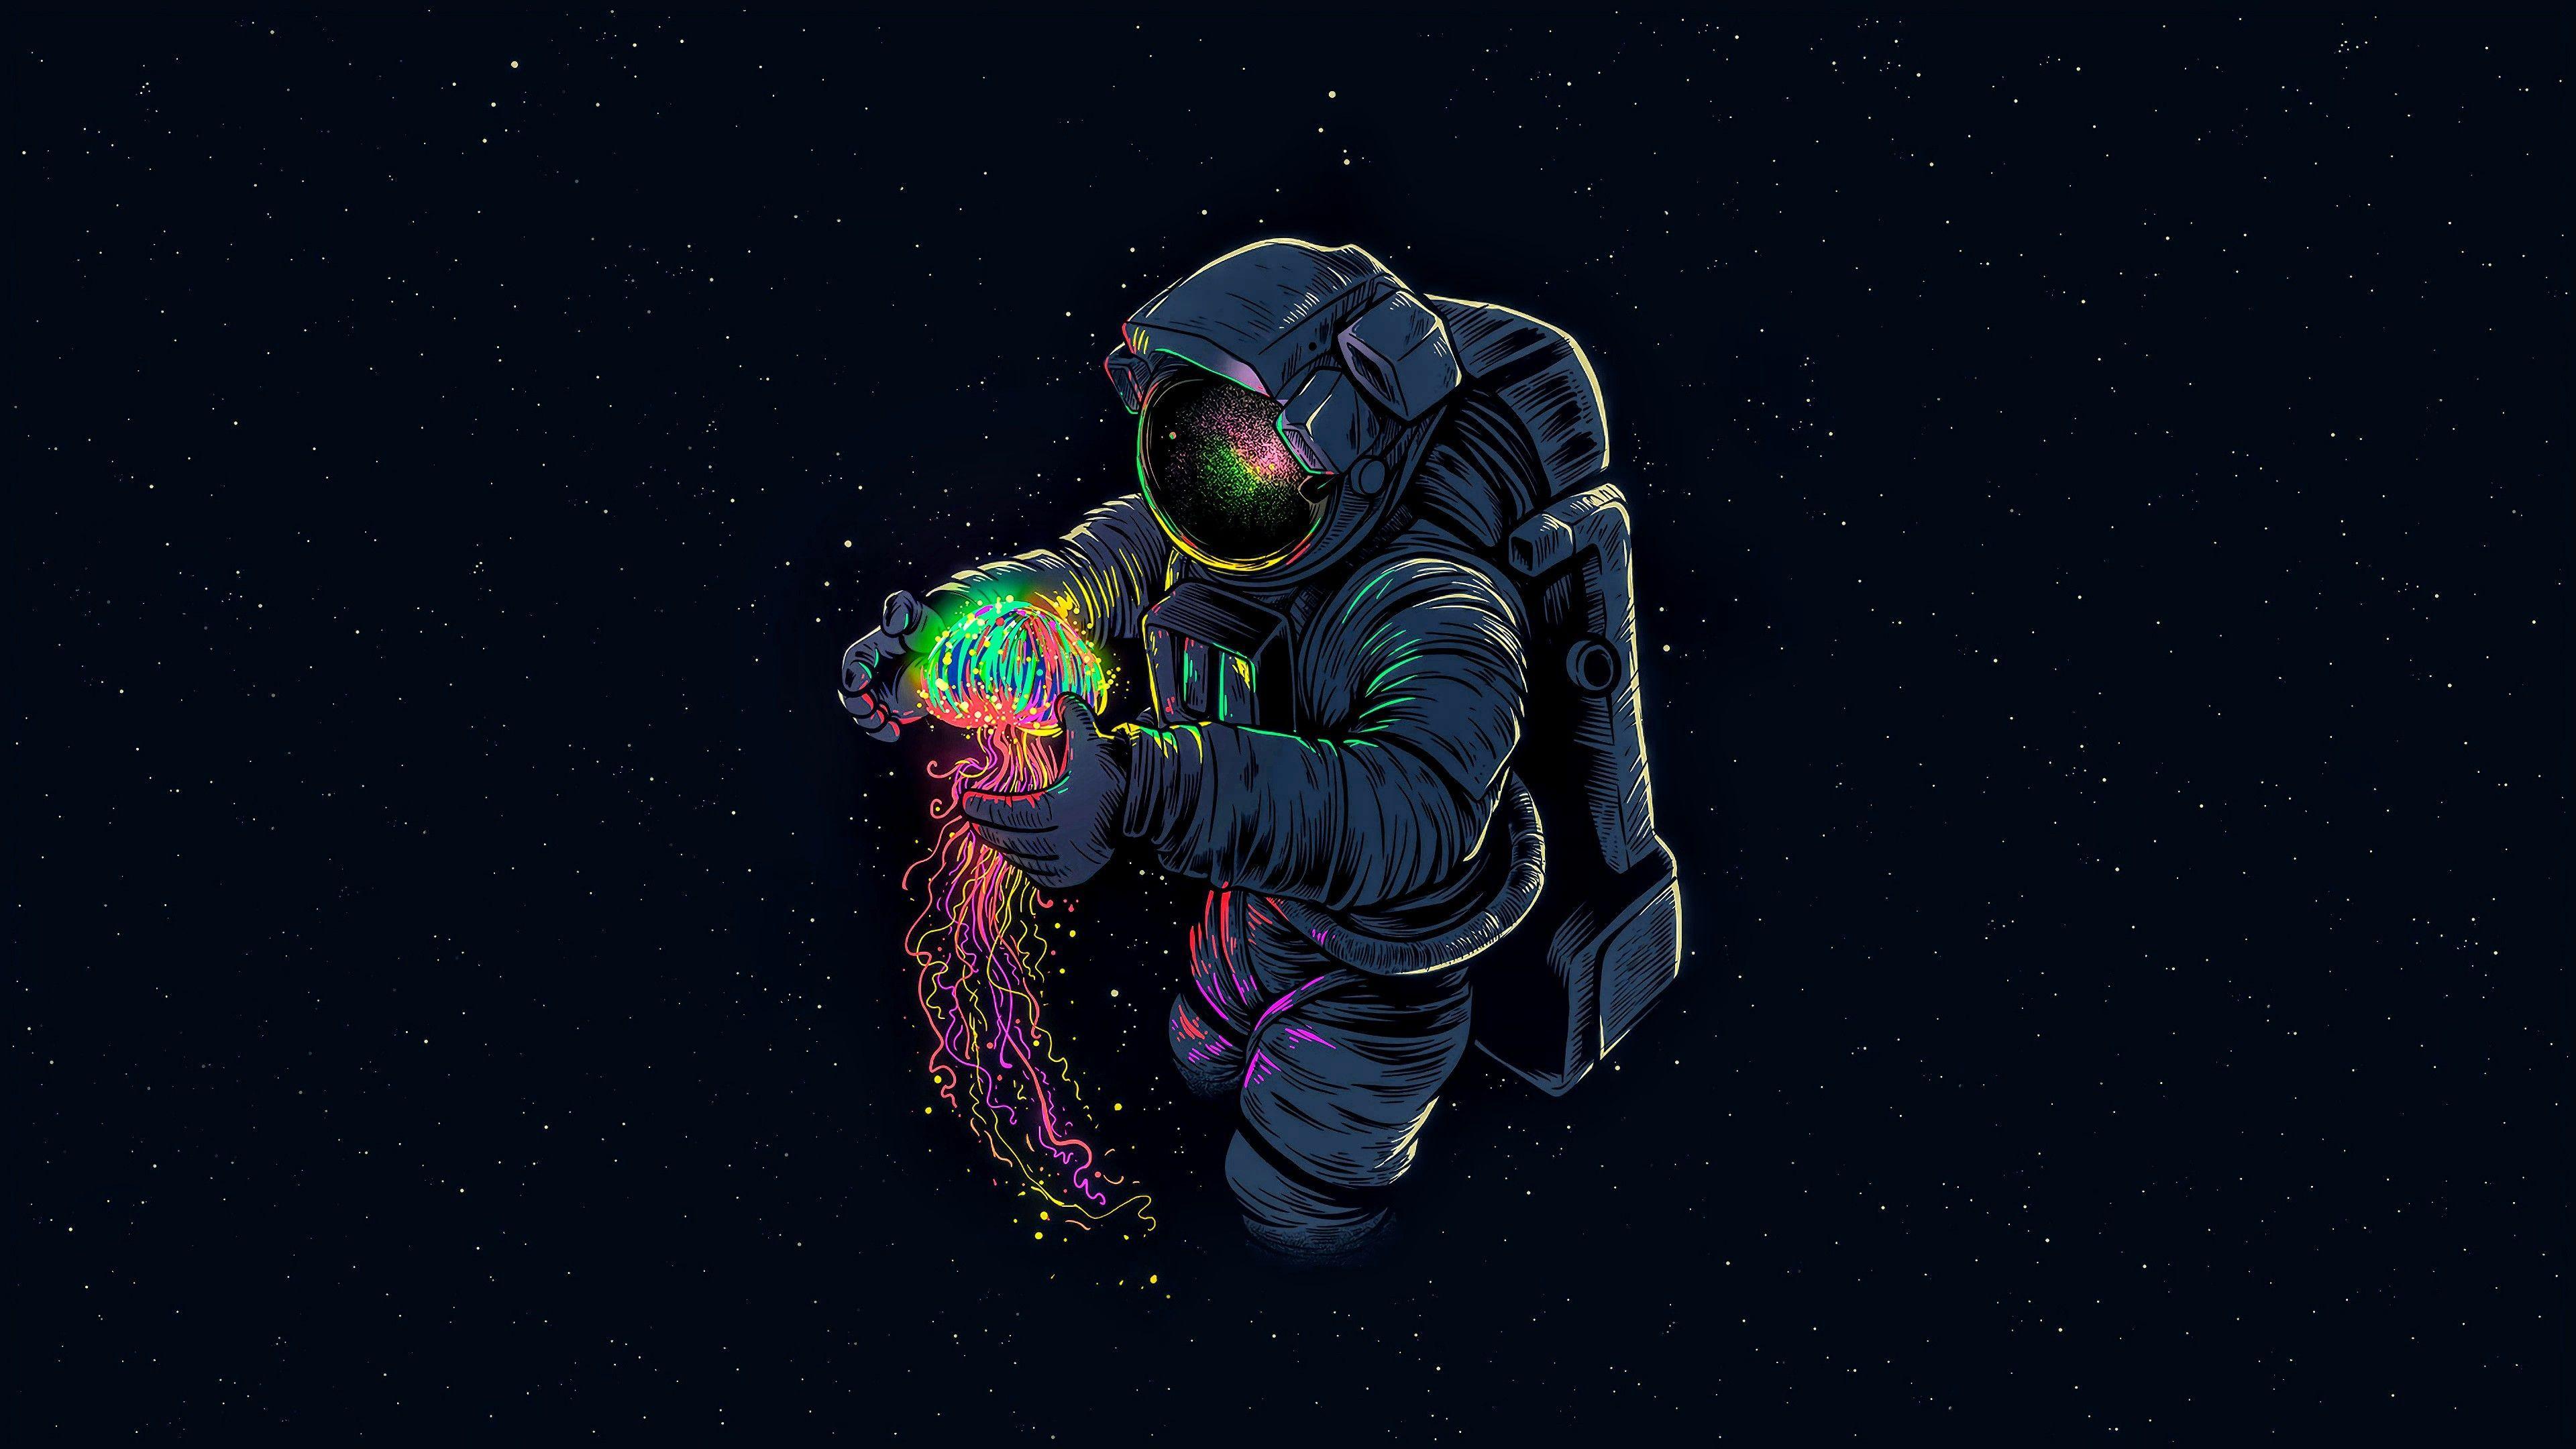 Astronaut PC Wallpapers - Top Free Astronaut PC Backgrounds